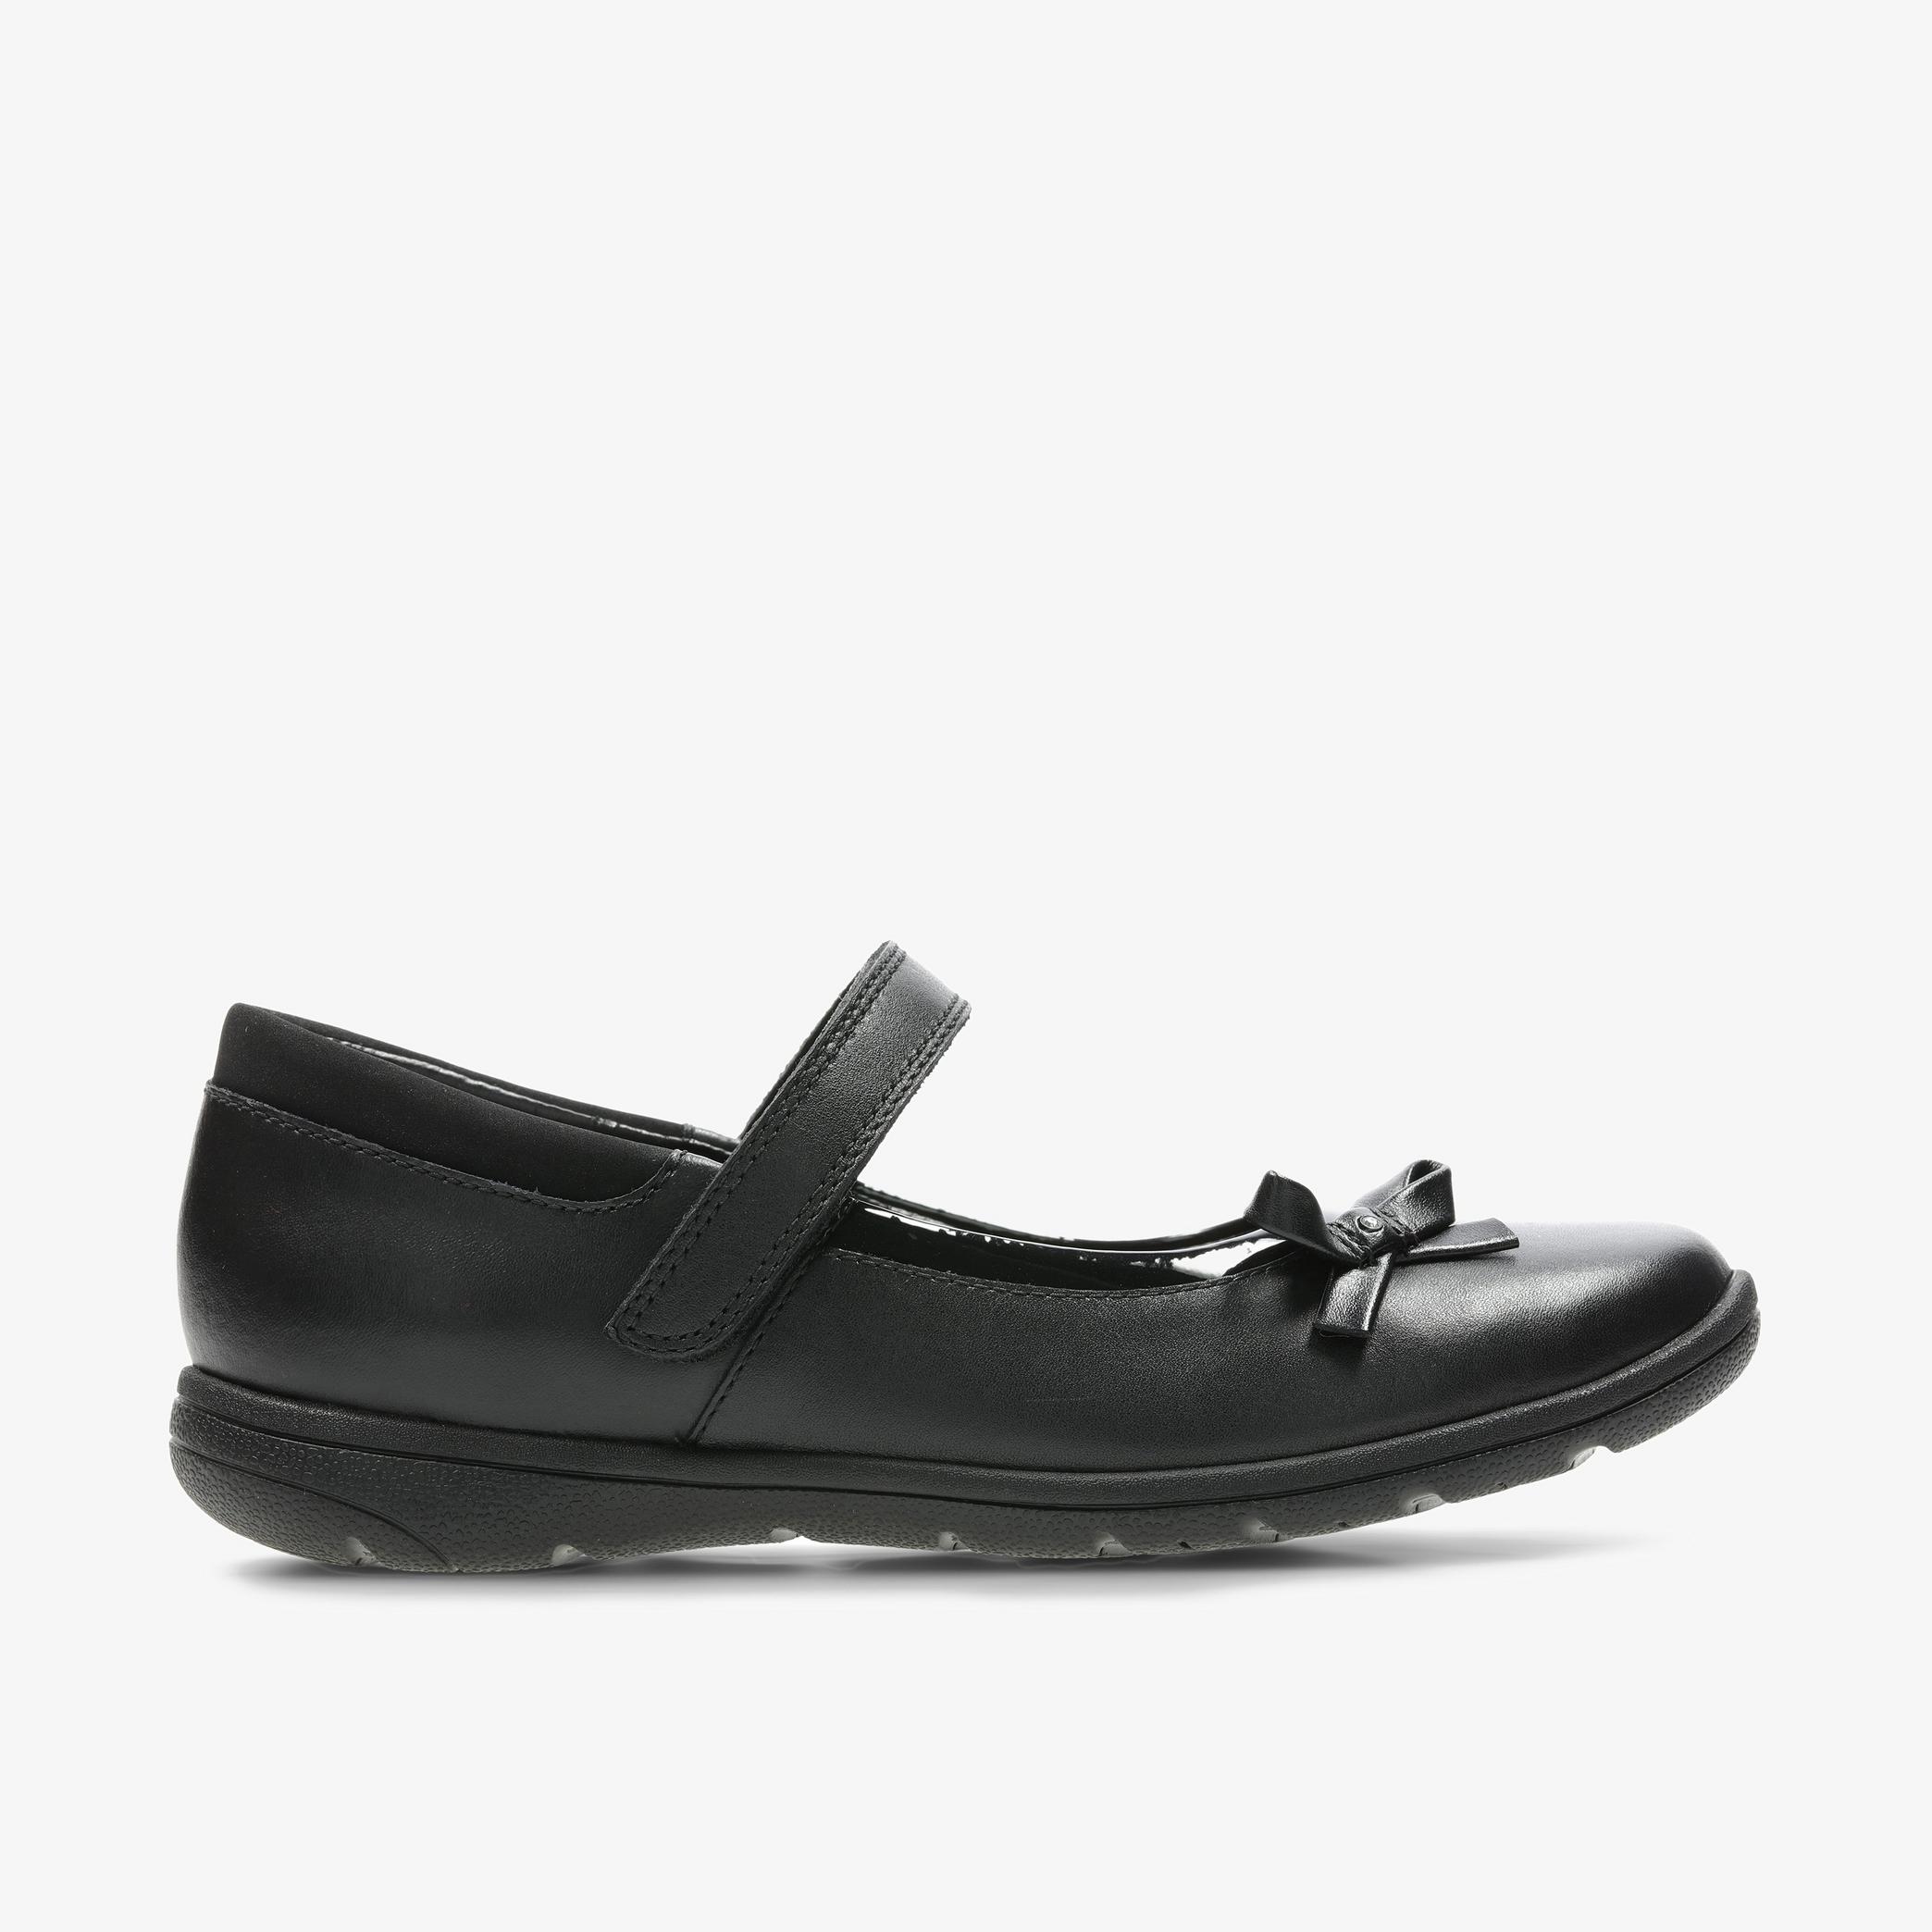 Venture Star Kid Black Leather Shoes, view 1 of 6